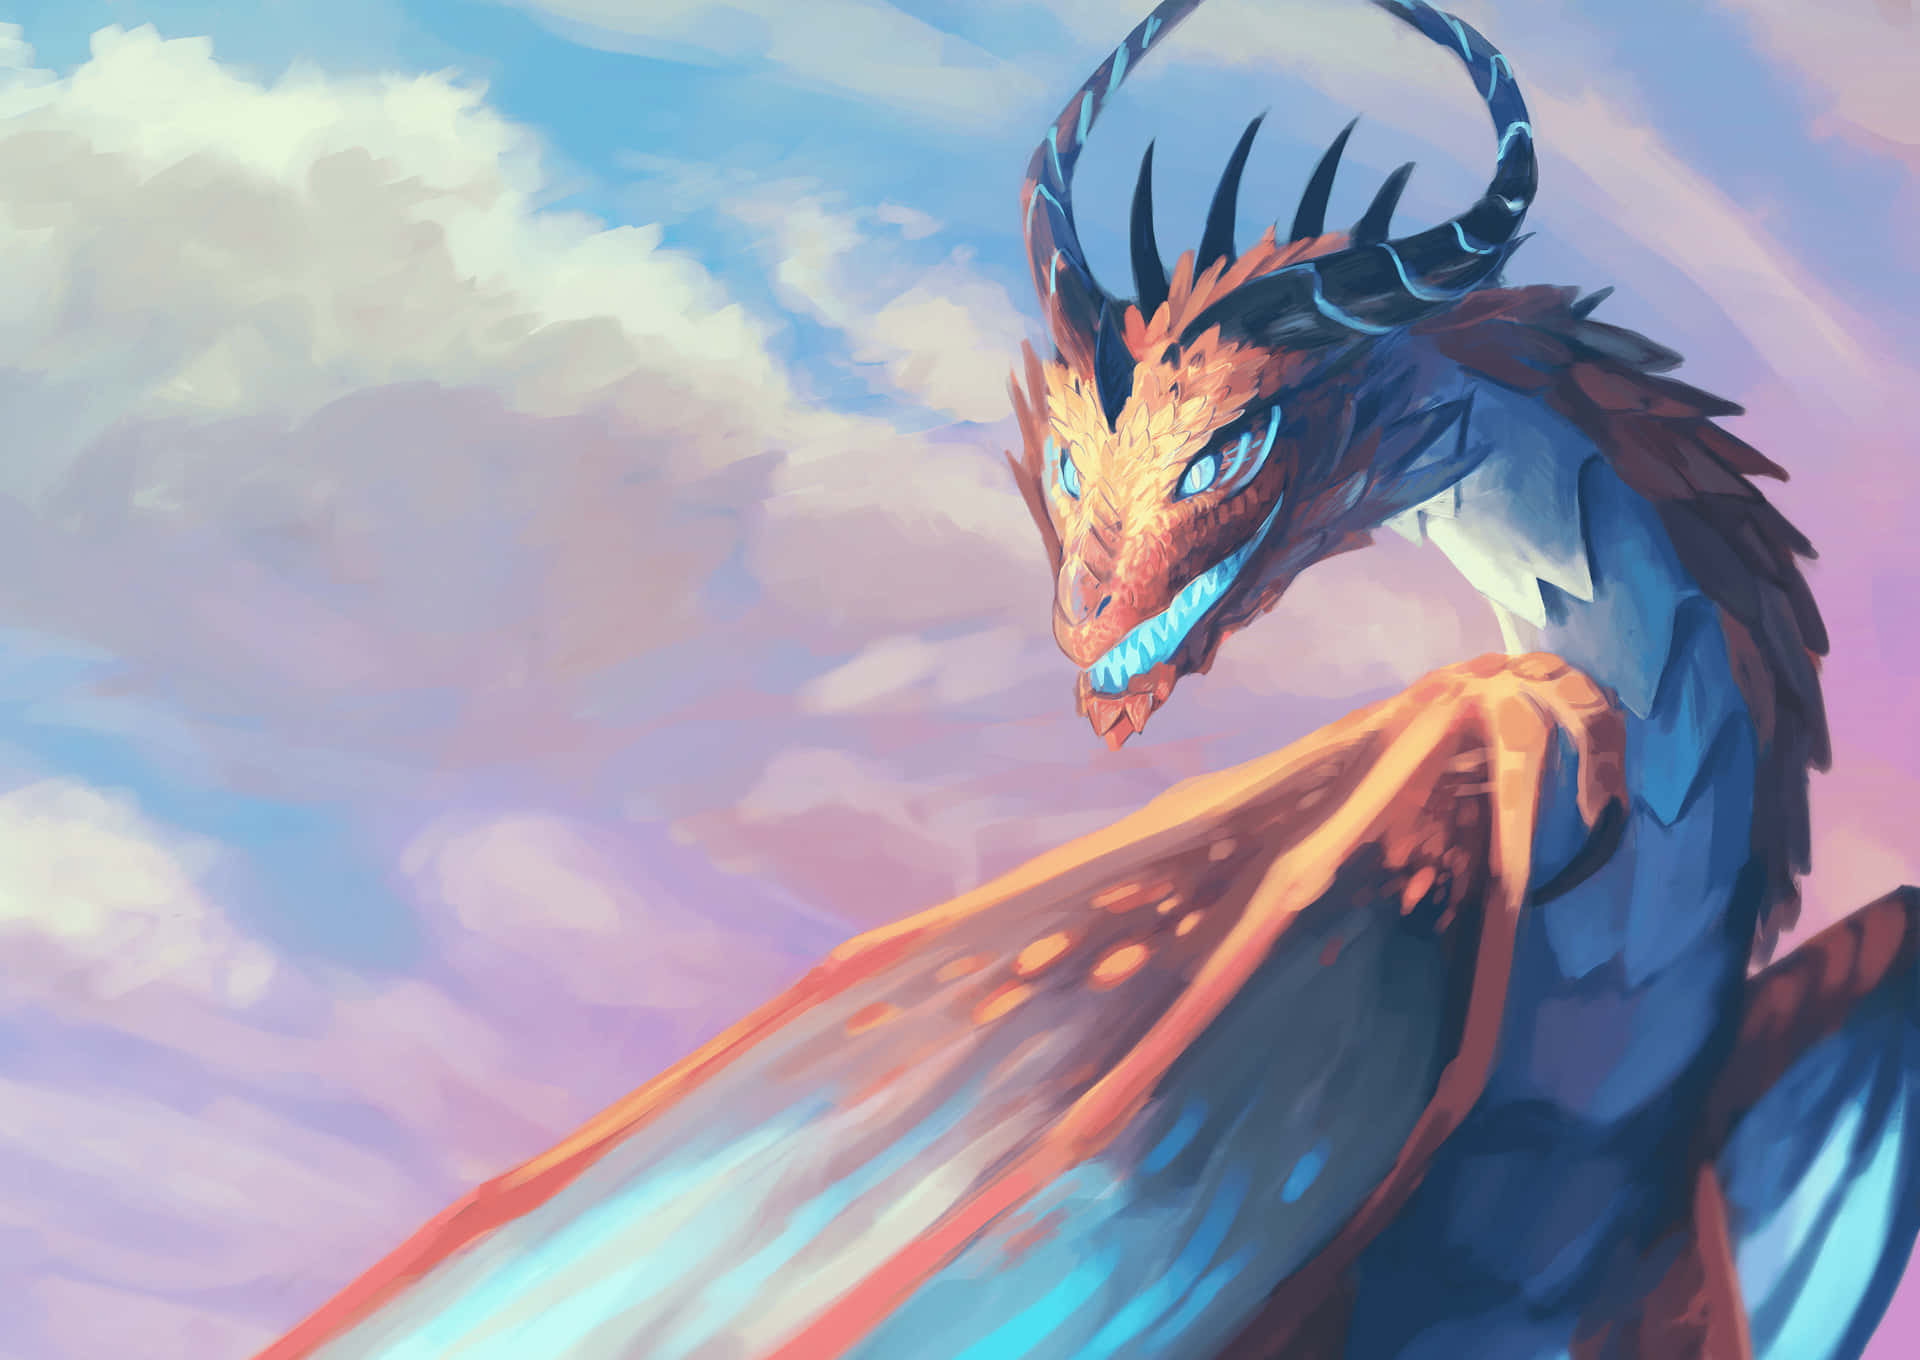 “An Epic Mythical Dragon Soars Across the Sky.” Wallpaper